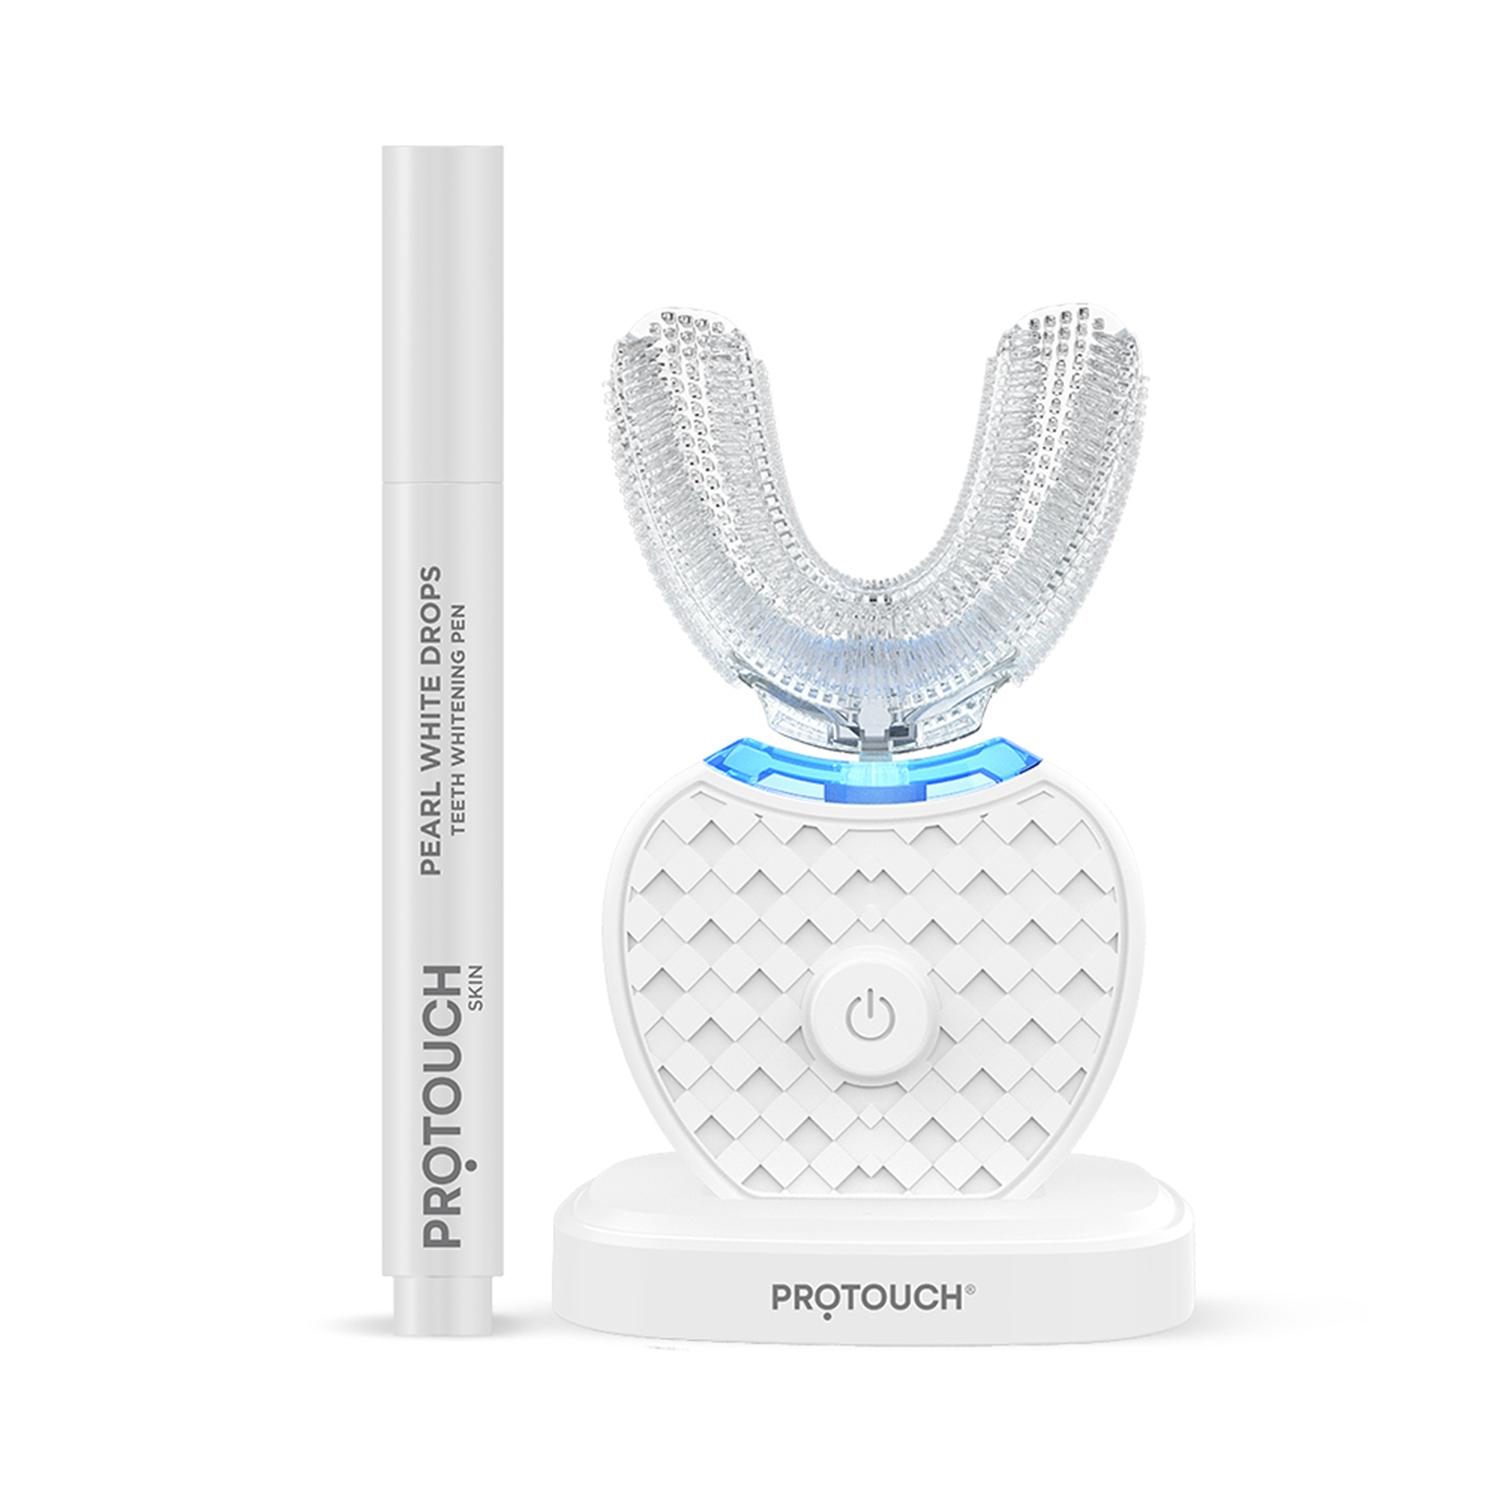 Protouch | Protouch Proteeth Ultrasonic Toothbrush & Teeth Whitening Pen Enamel Safe For Men & Women Combo